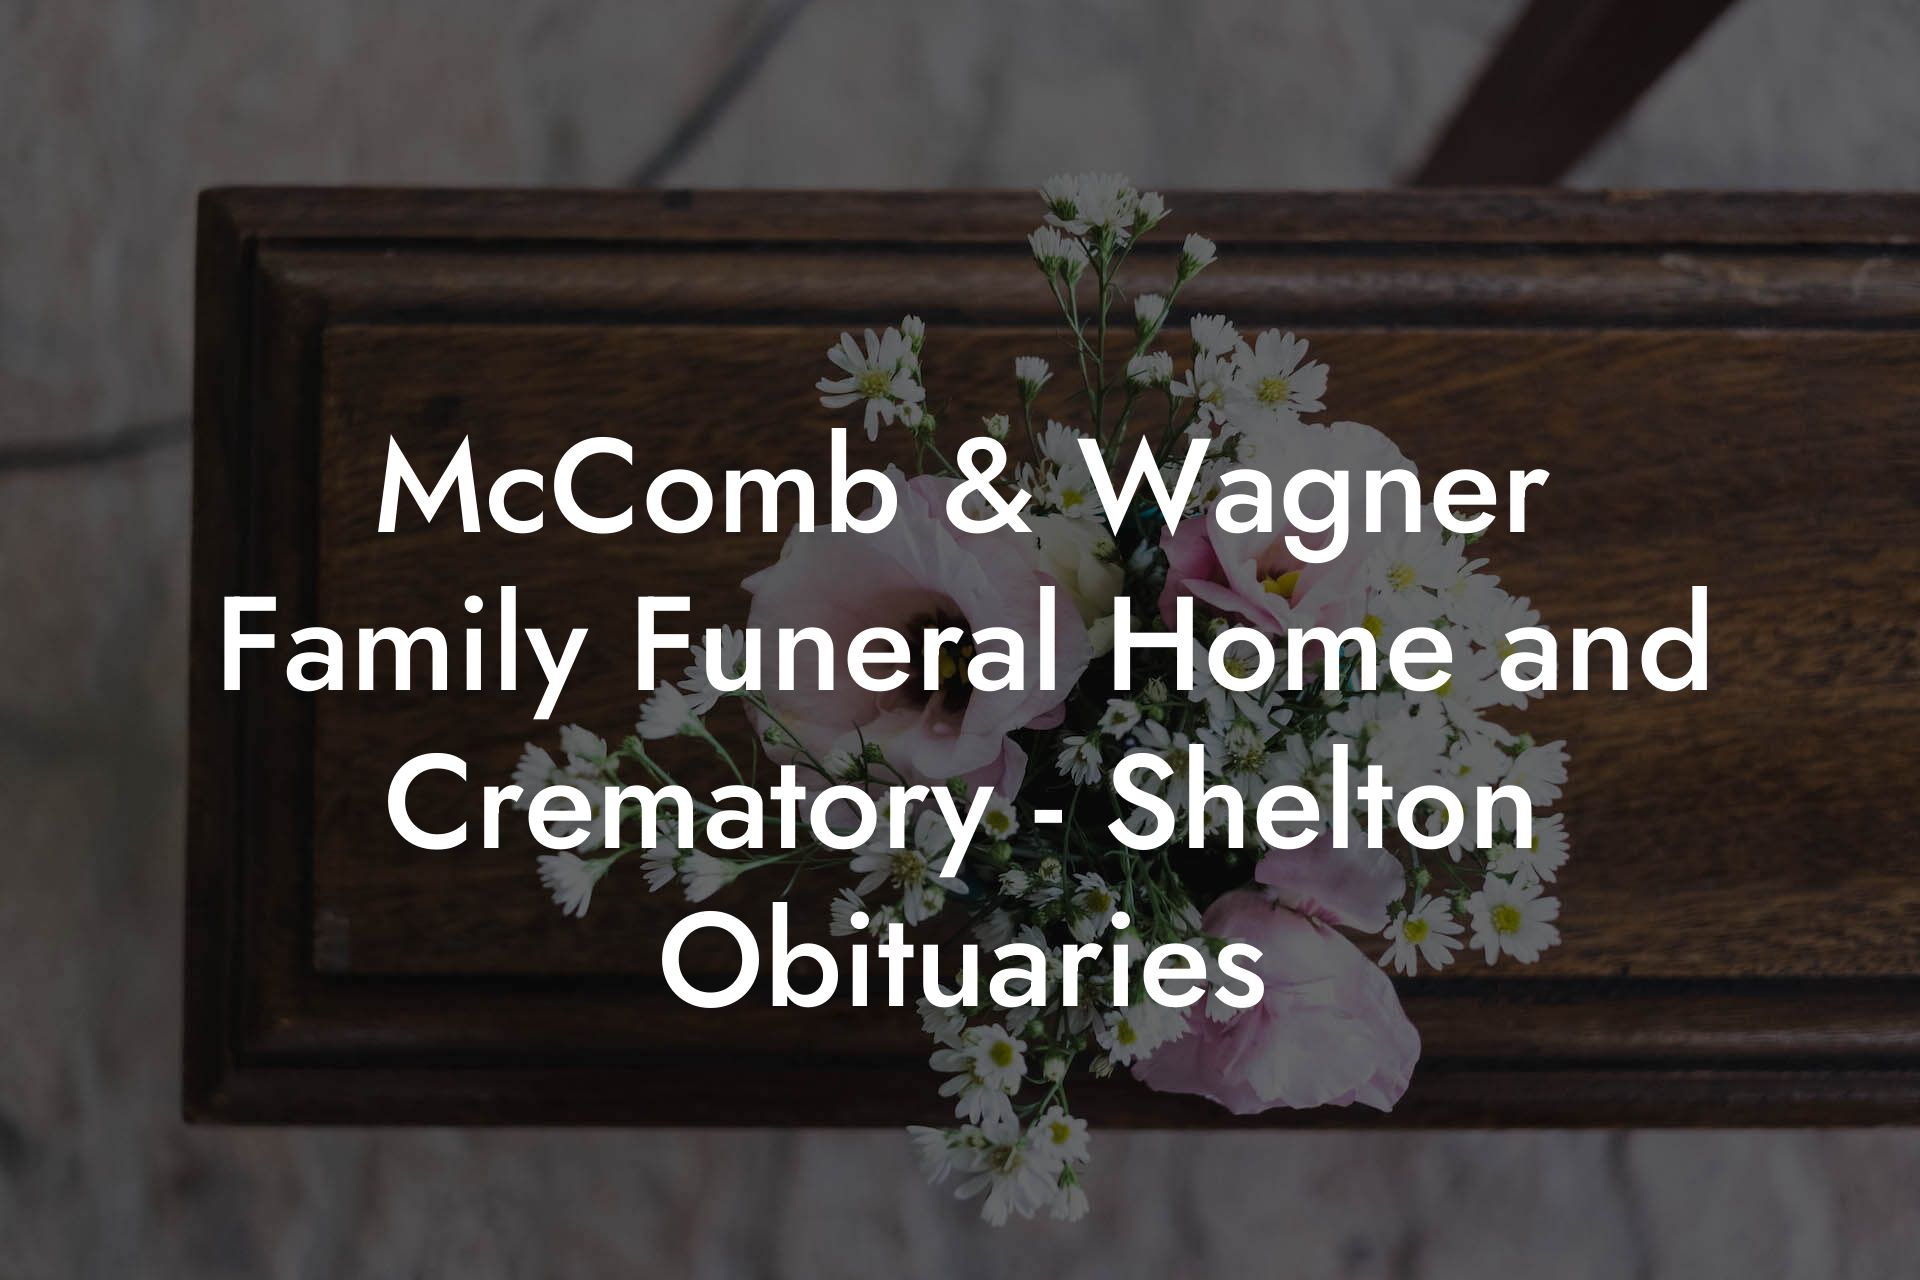 McComb & Wagner Family Funeral Home and Crematory - Shelton Obituaries